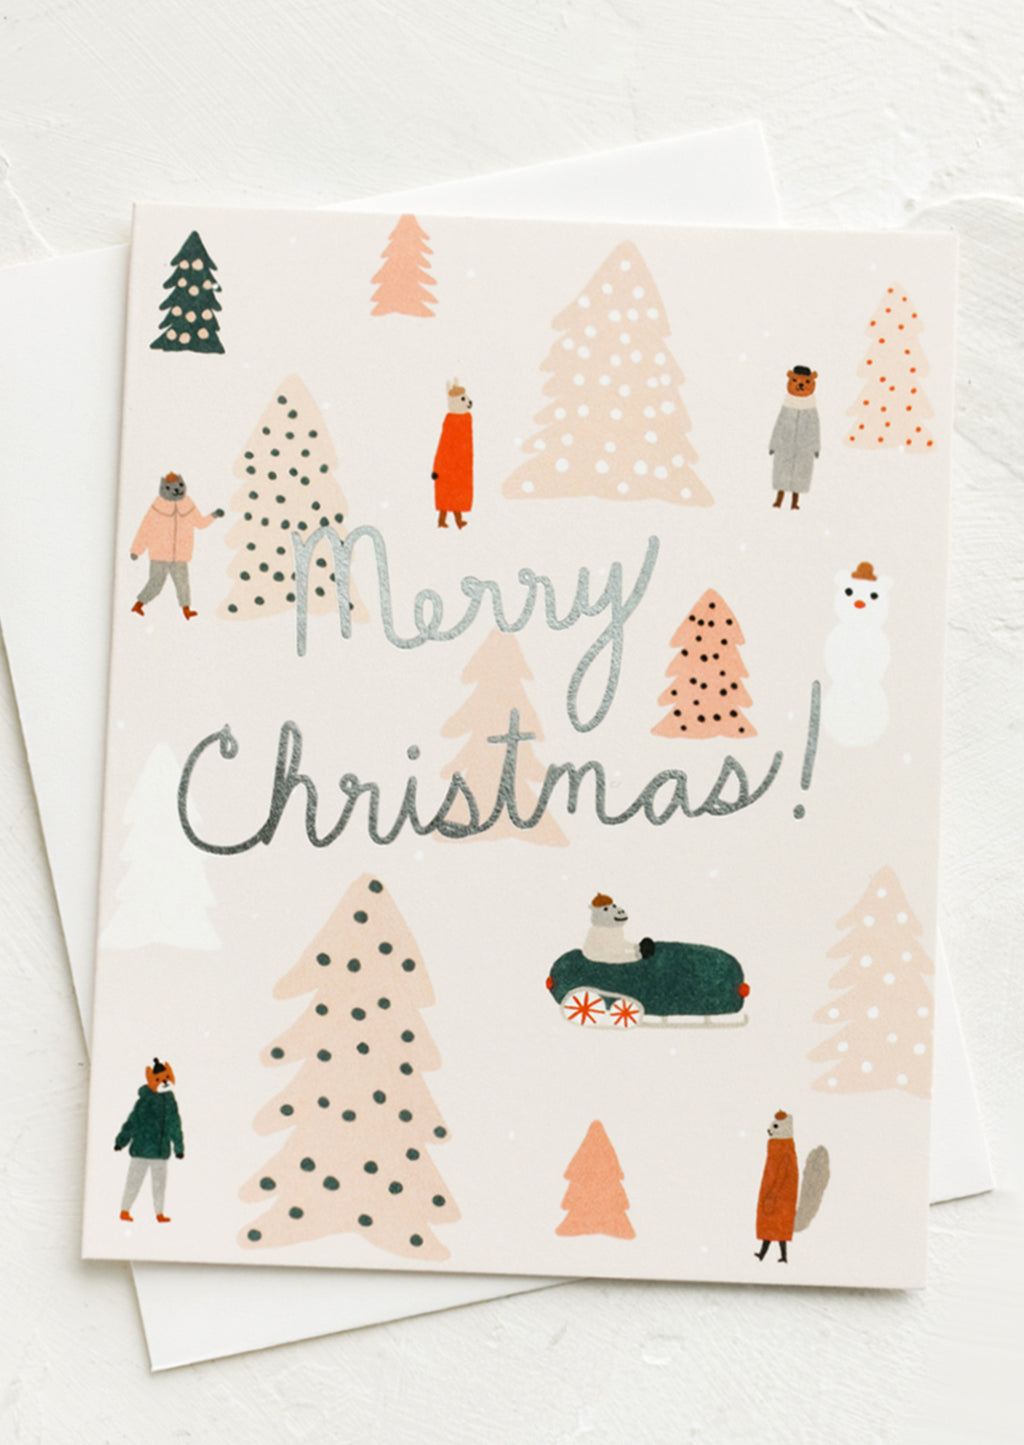 2: A greeting card with animals surrounded by pink Christmas trees and silver text reads "Merry Christmas!".